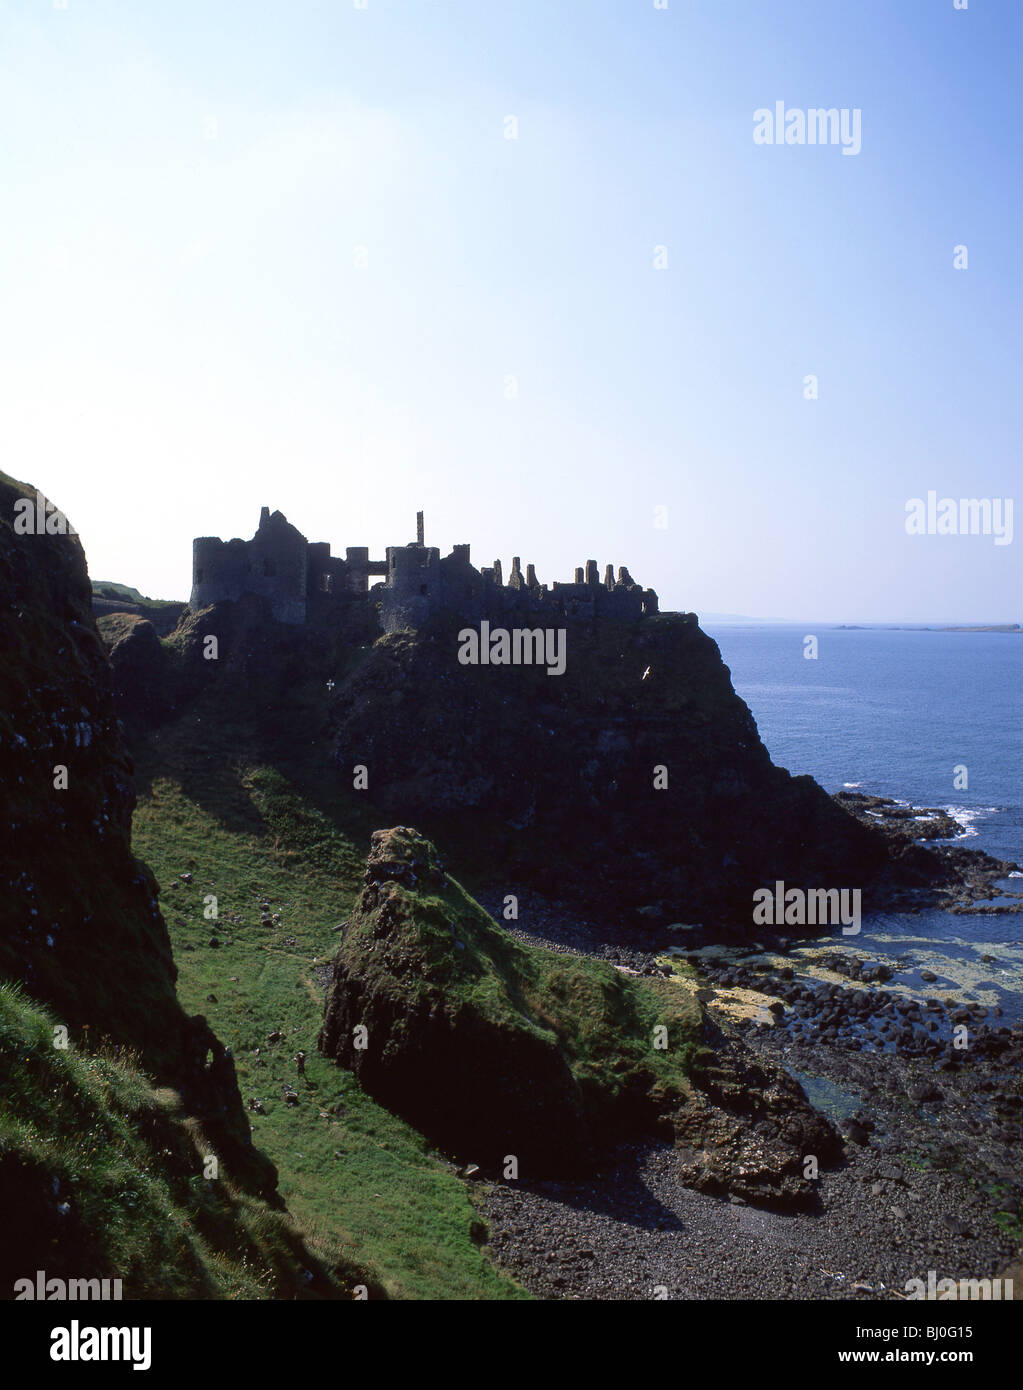 View of castle and sea, Dunluce Castle, County Antrim, Northern Ireland, United Kingdom Stock Photo